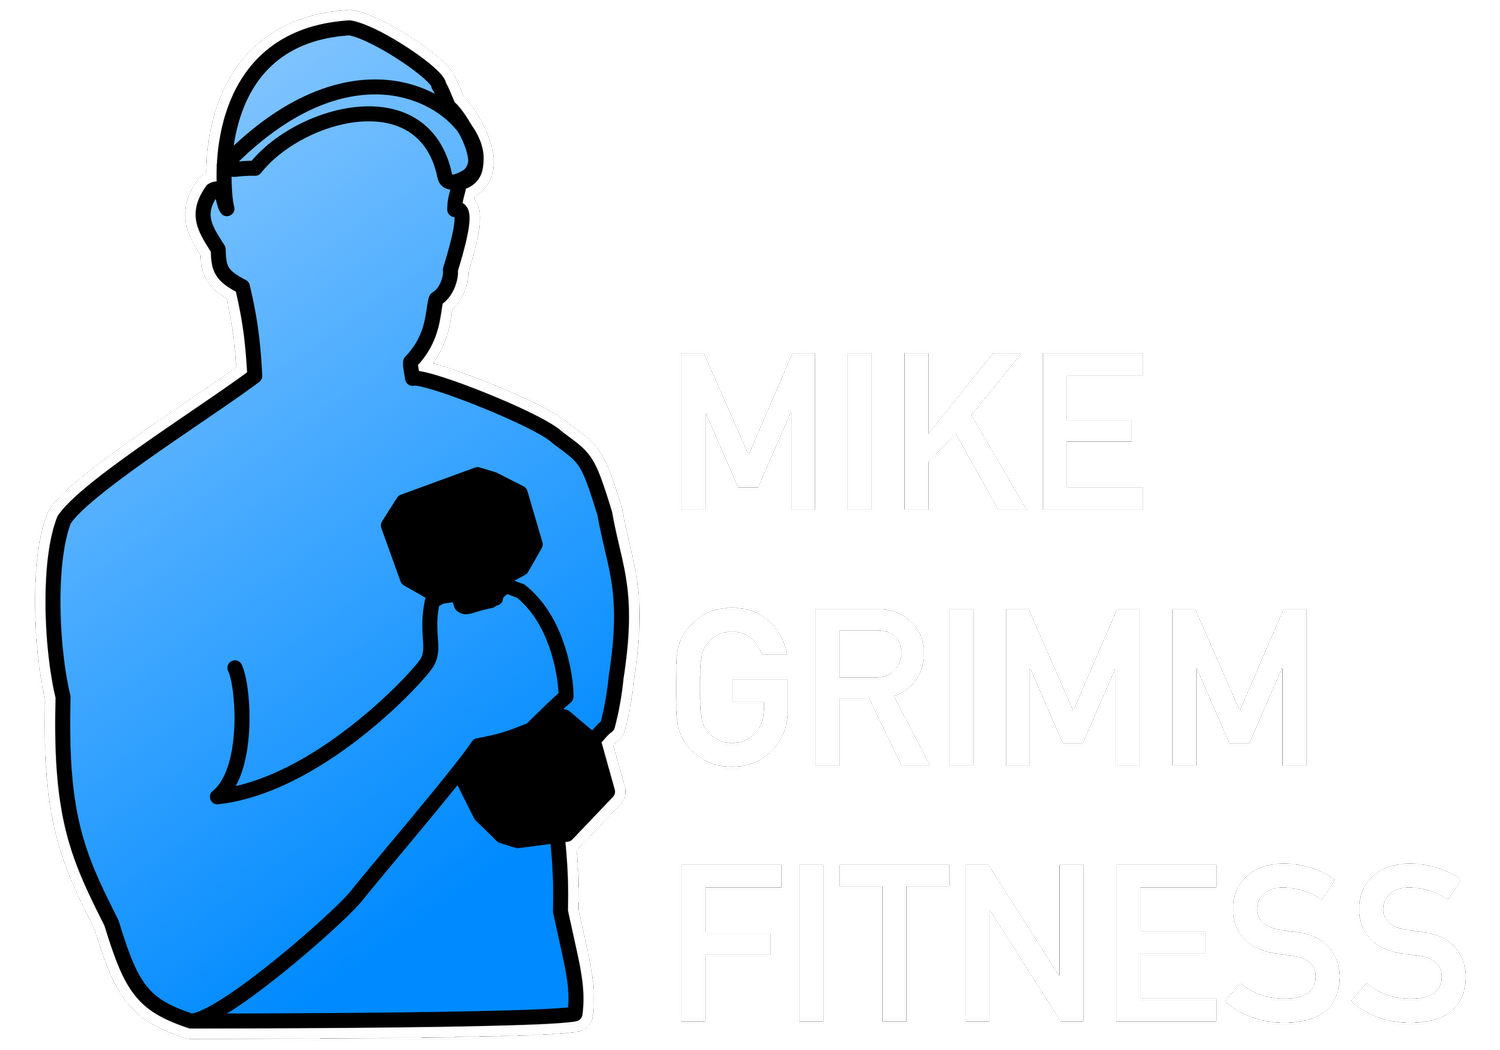 Mike Grimm Fitness